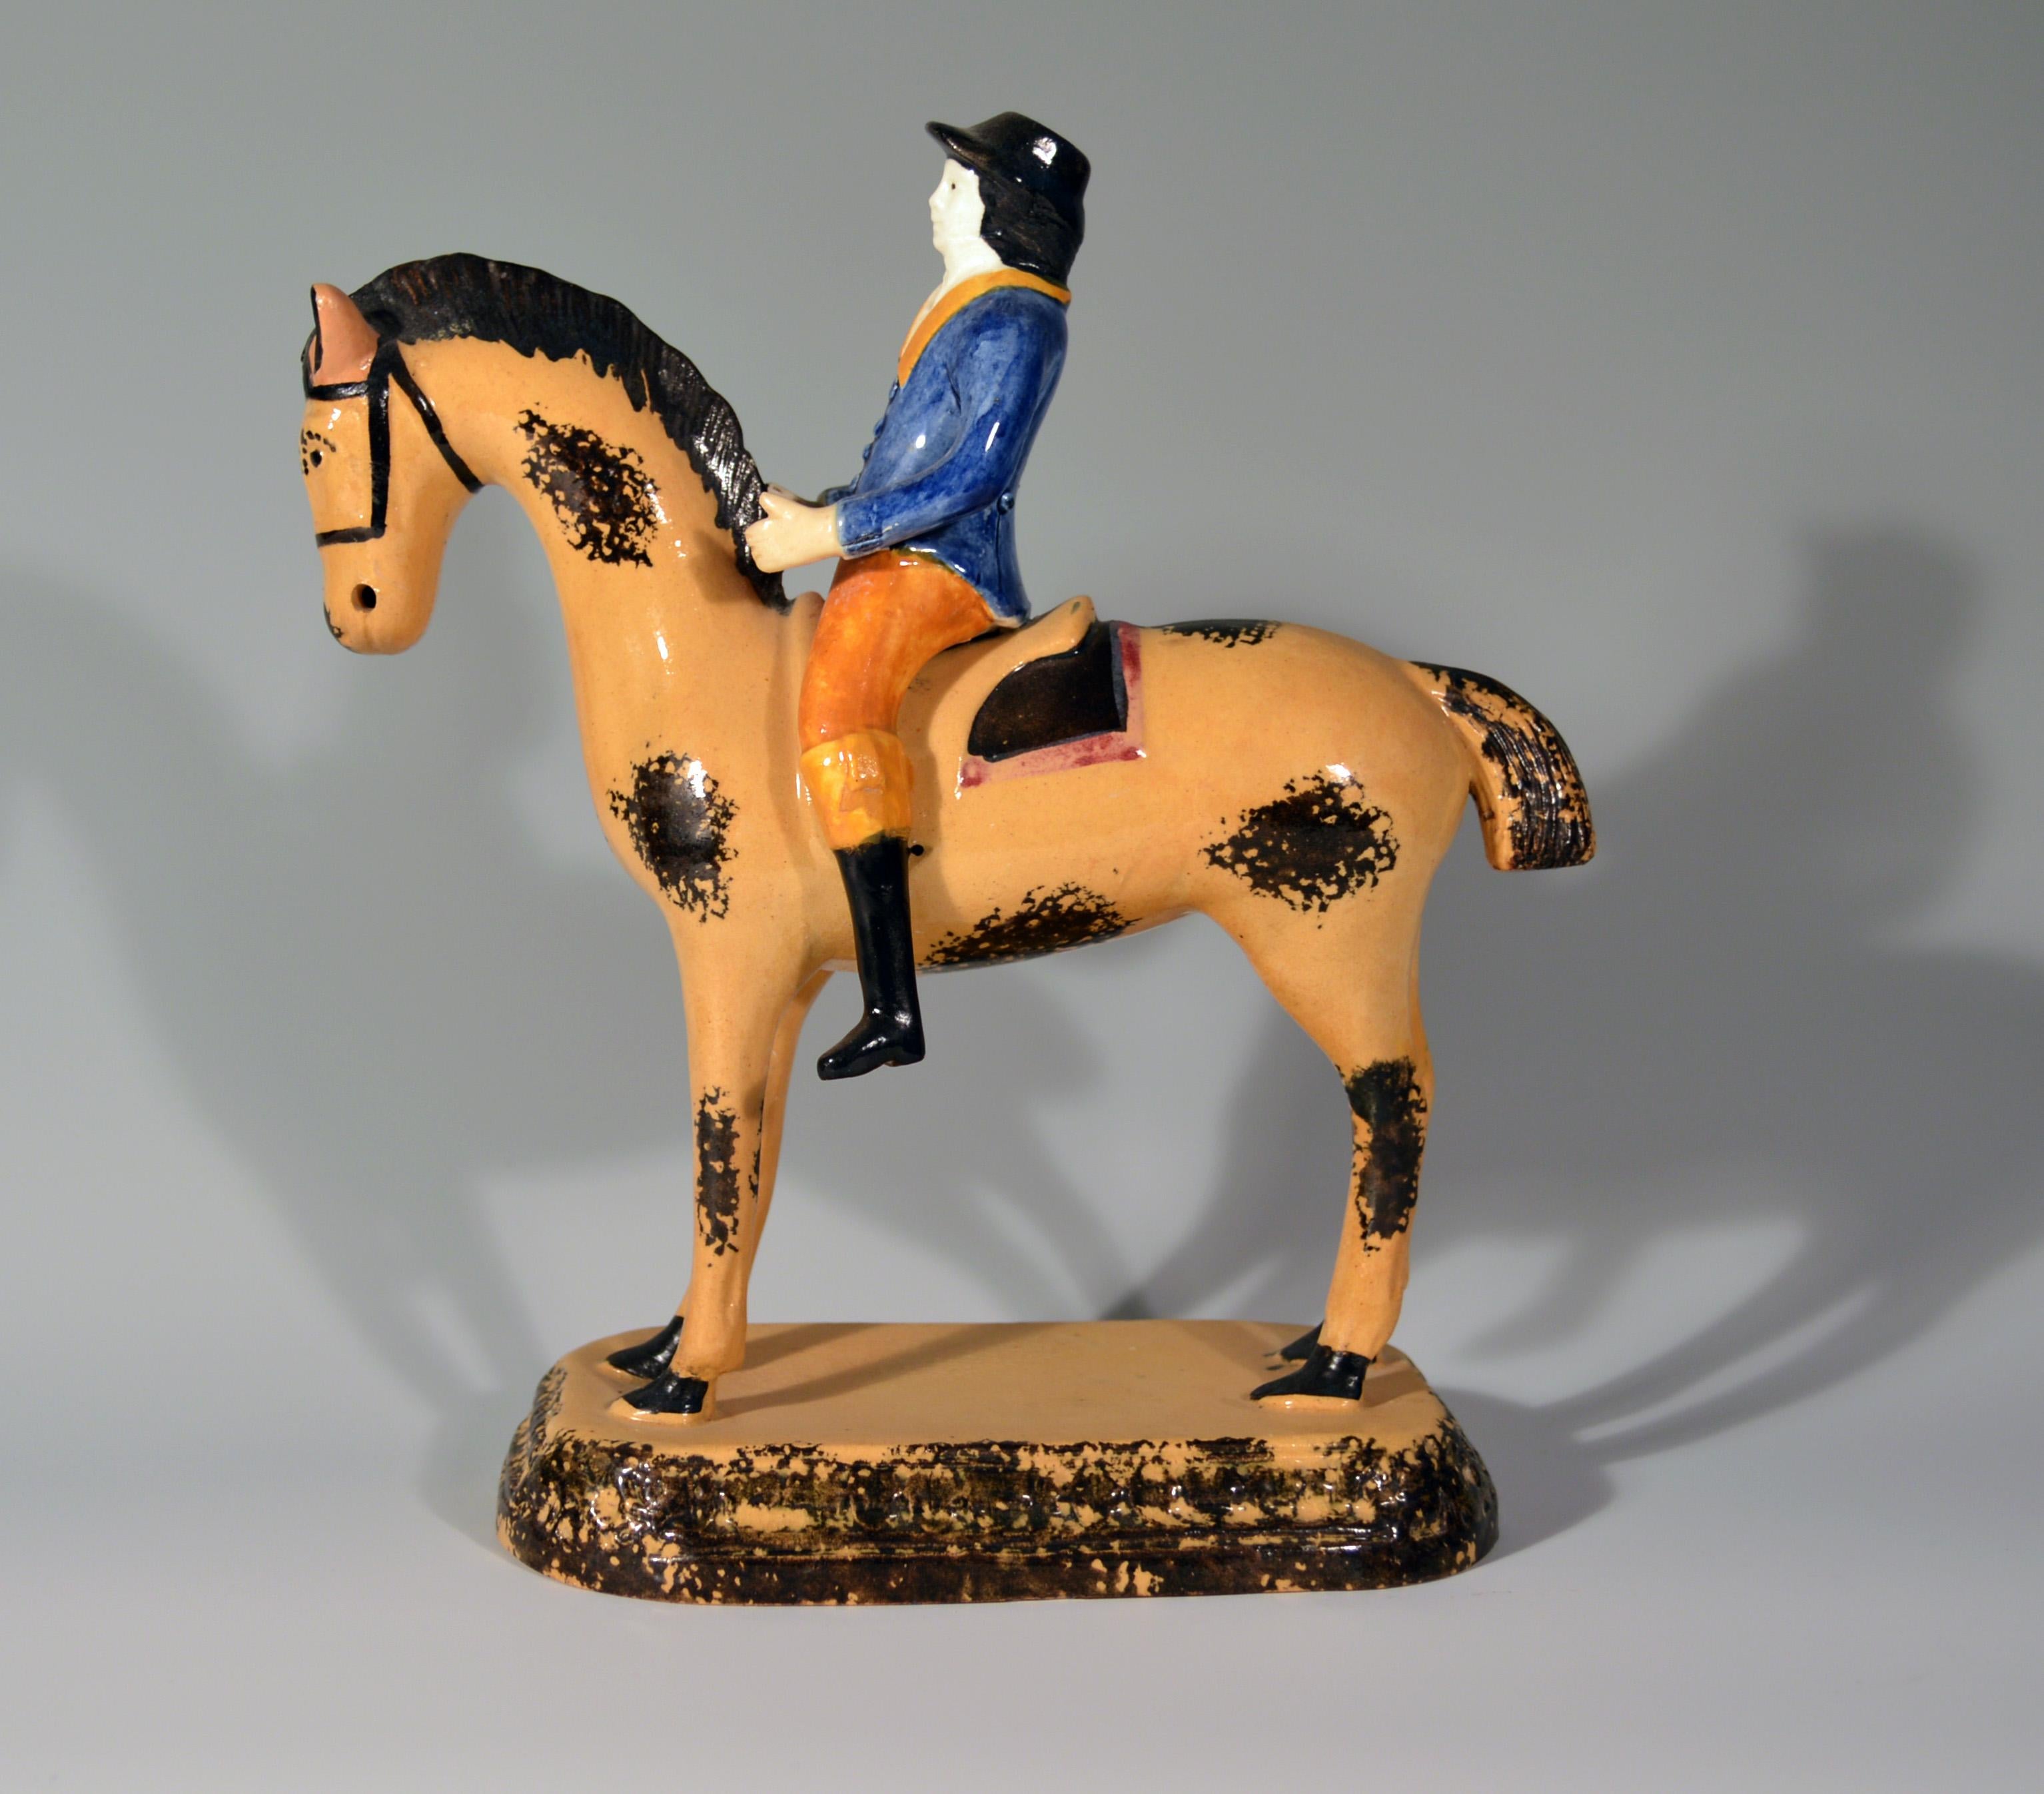 Prattware Pearlware Large Figure of Horse & Rider, Yorkshire, circa 1800-1825.

The large rare figure depicts a rider mounted on the back of a horse. The horse, dun-coloured with black splotches, stands on a rectangular shallow-domed rectangular